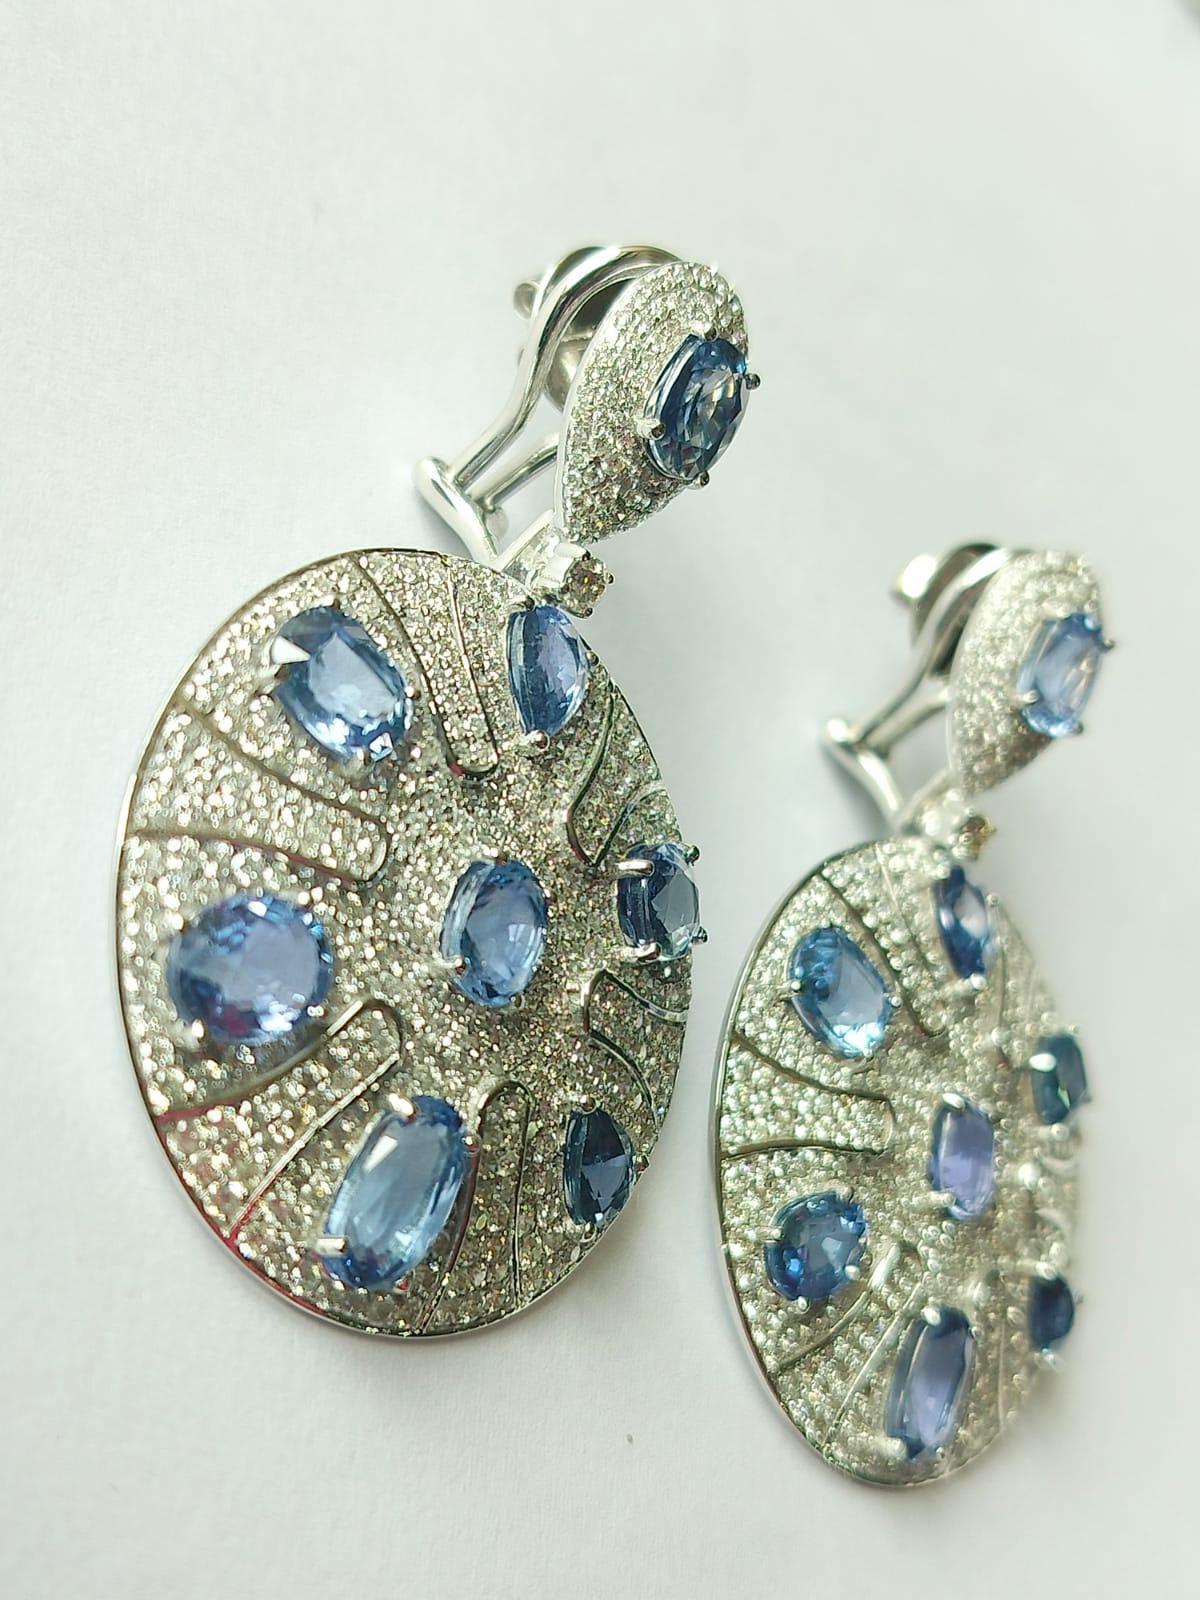 A very gorgeous and chic, Blue Sapphire Earrings set in 18K White Gold & Diamonds. The weight of the Blue Sapphire Ovals is 16.84 carats. The Sapphires are of Ceylon (Sri Lankan) origin. The weight of the Diamonds is 6.13 carats. Net Gold weight is